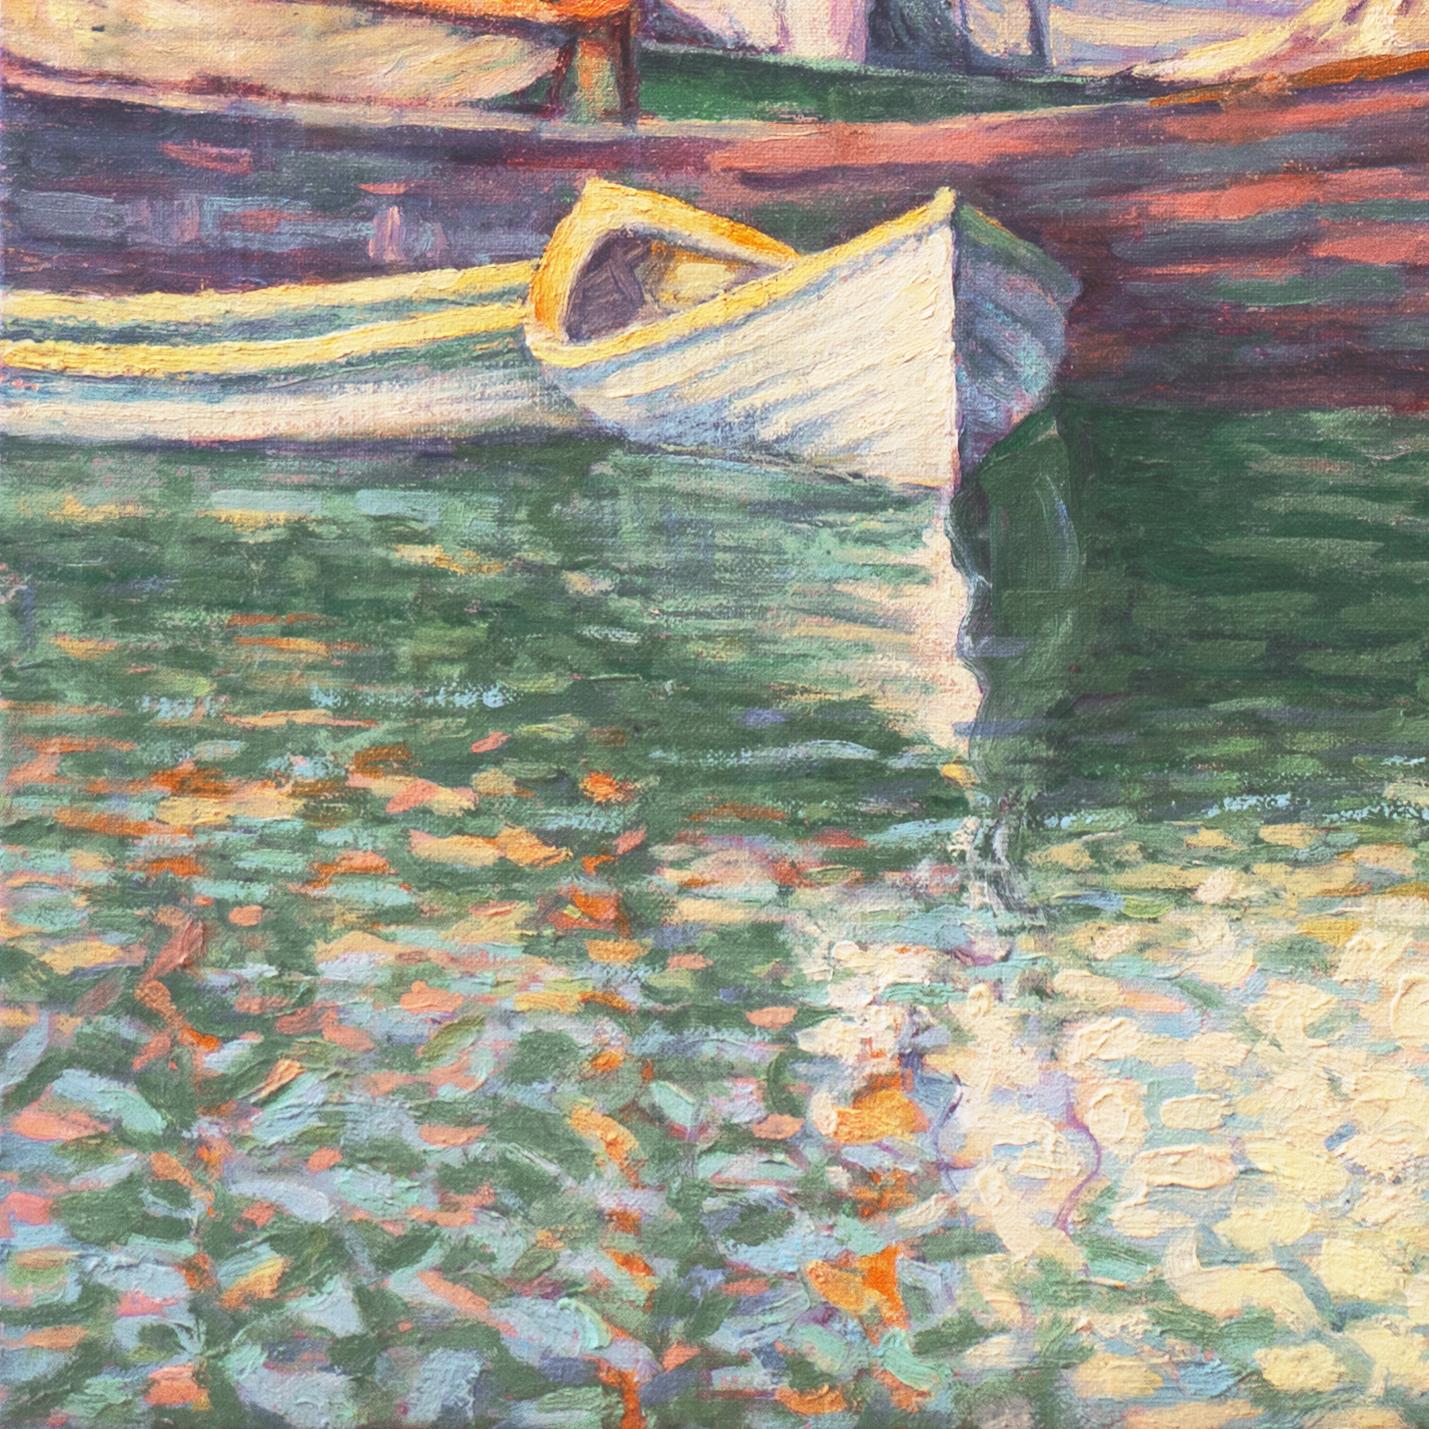 'Fishing Boats in Harbor', American School Oil, Oakland, San Francisco Bay Area - Painting by American School (20th century)